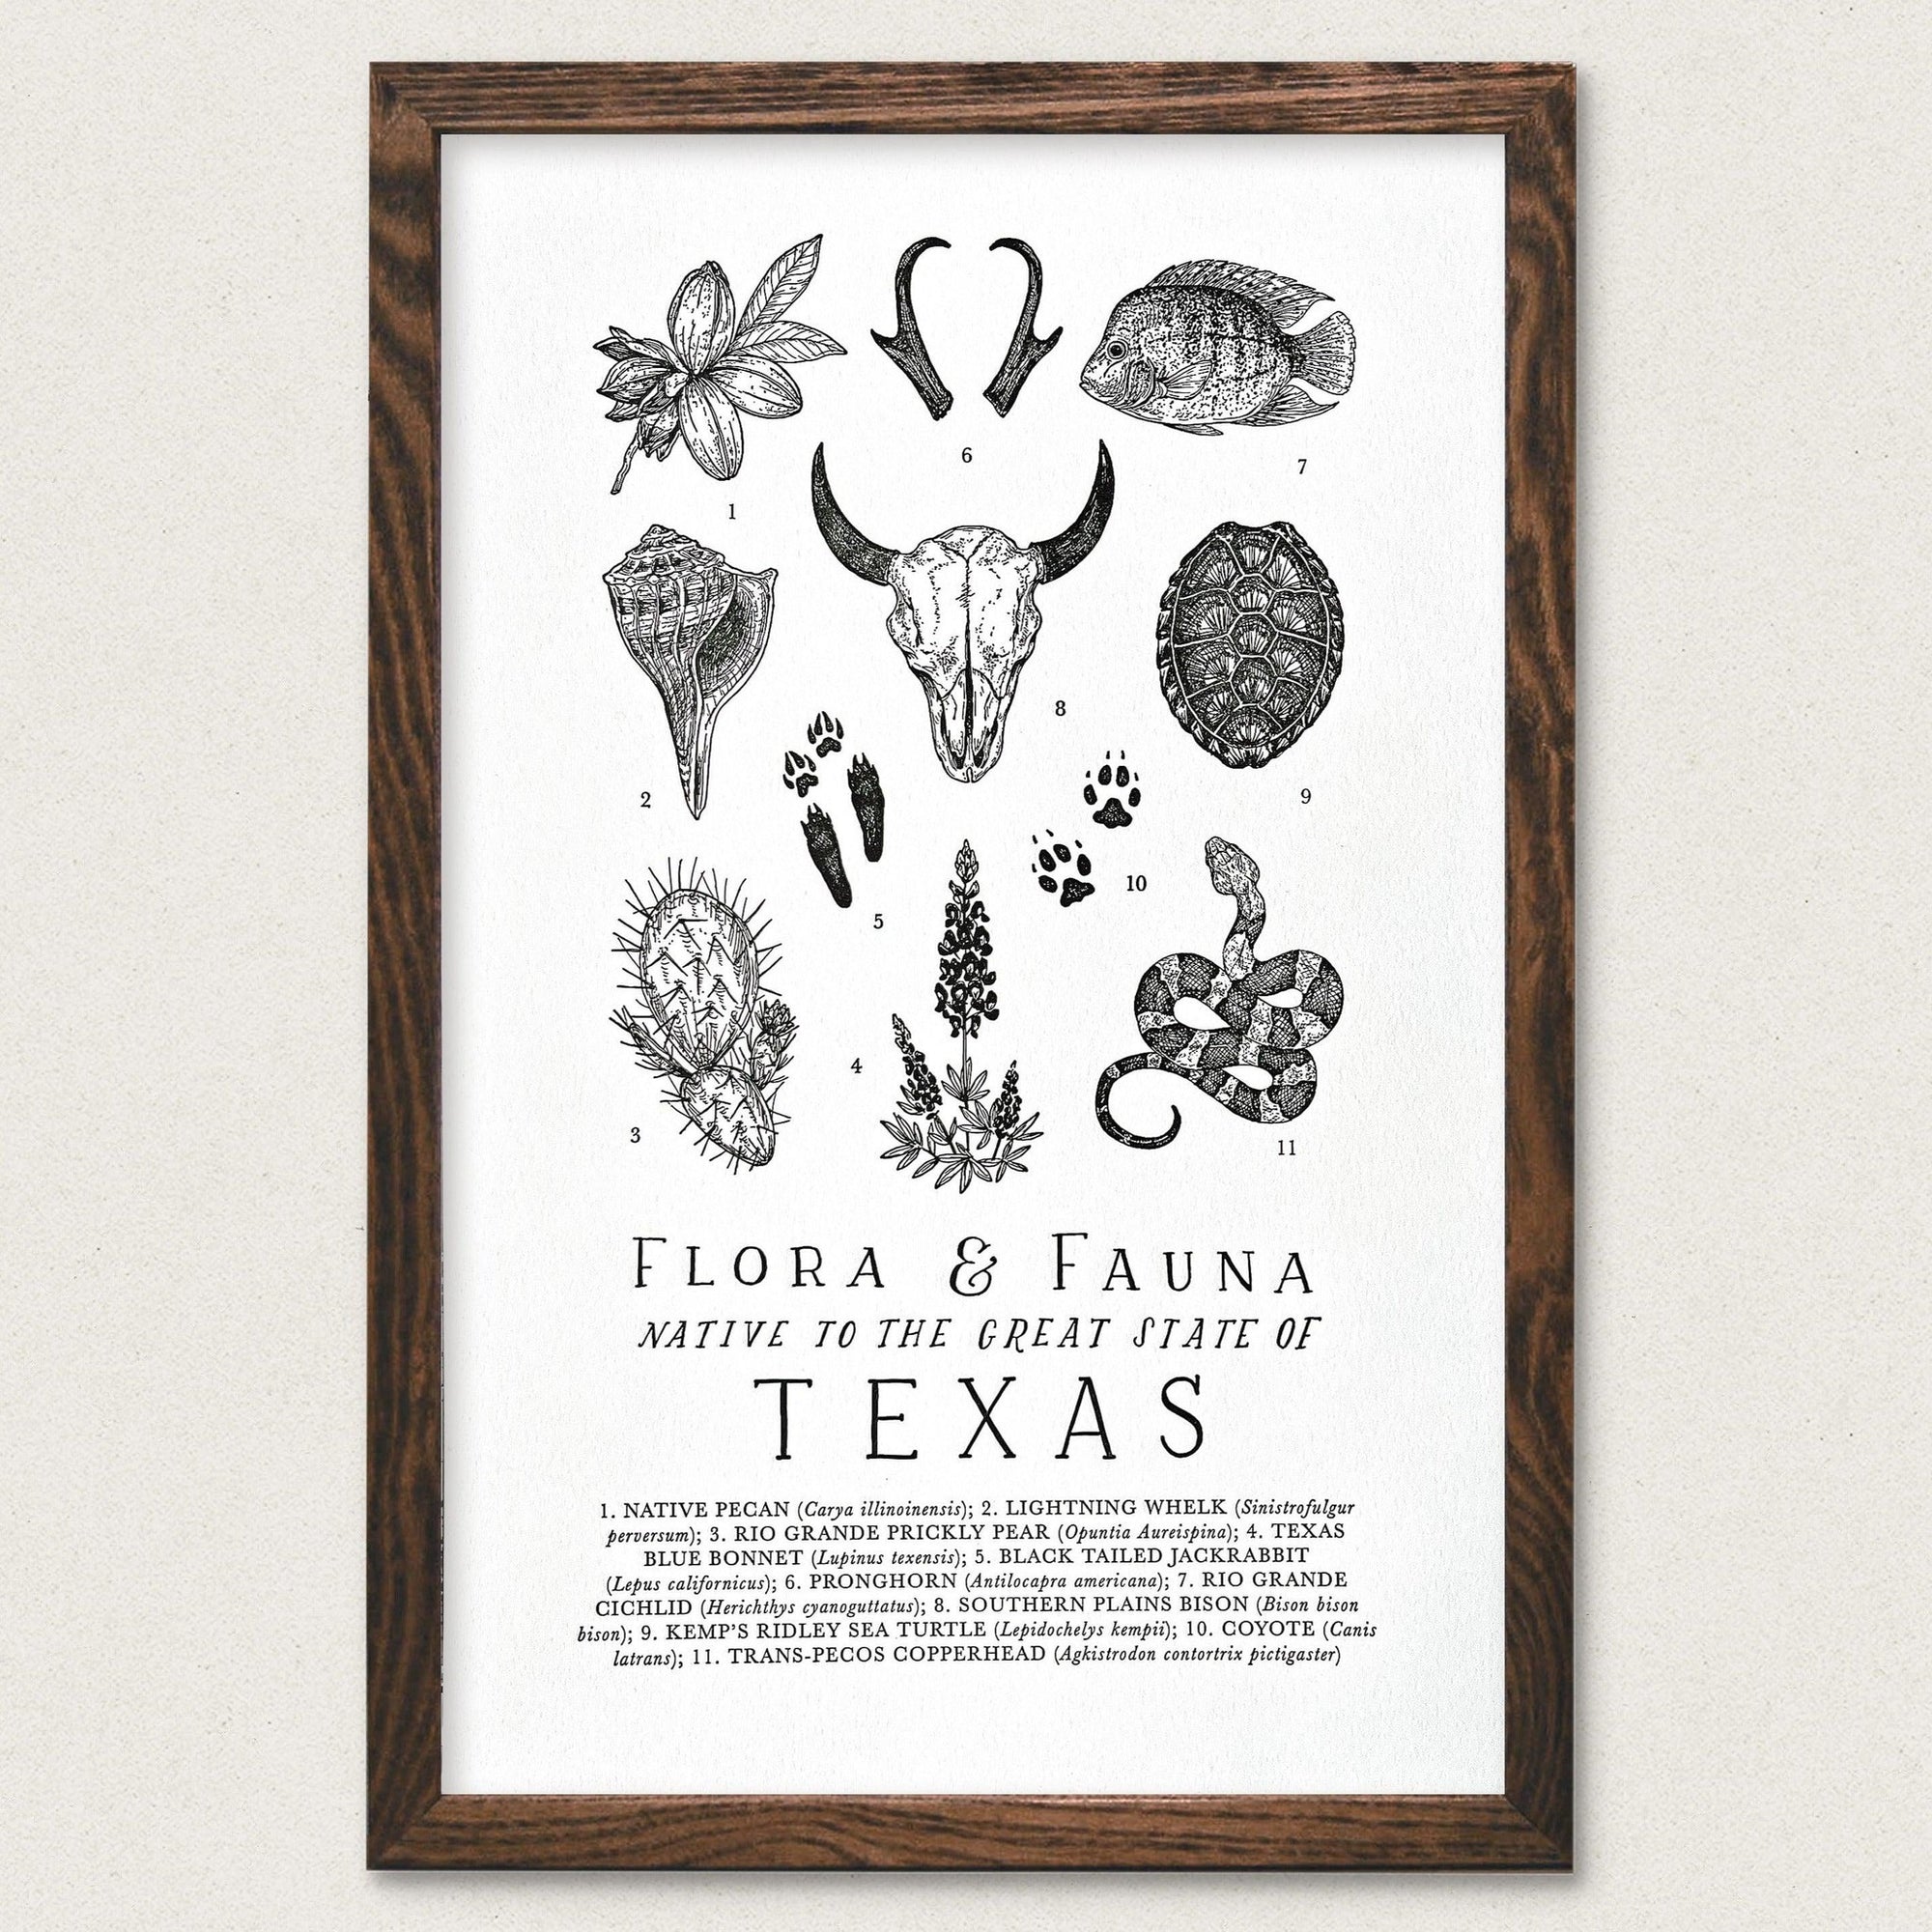 A black and white framed Texas Field Guide Letterpress Print of a texas wedding by The Wild Wander.